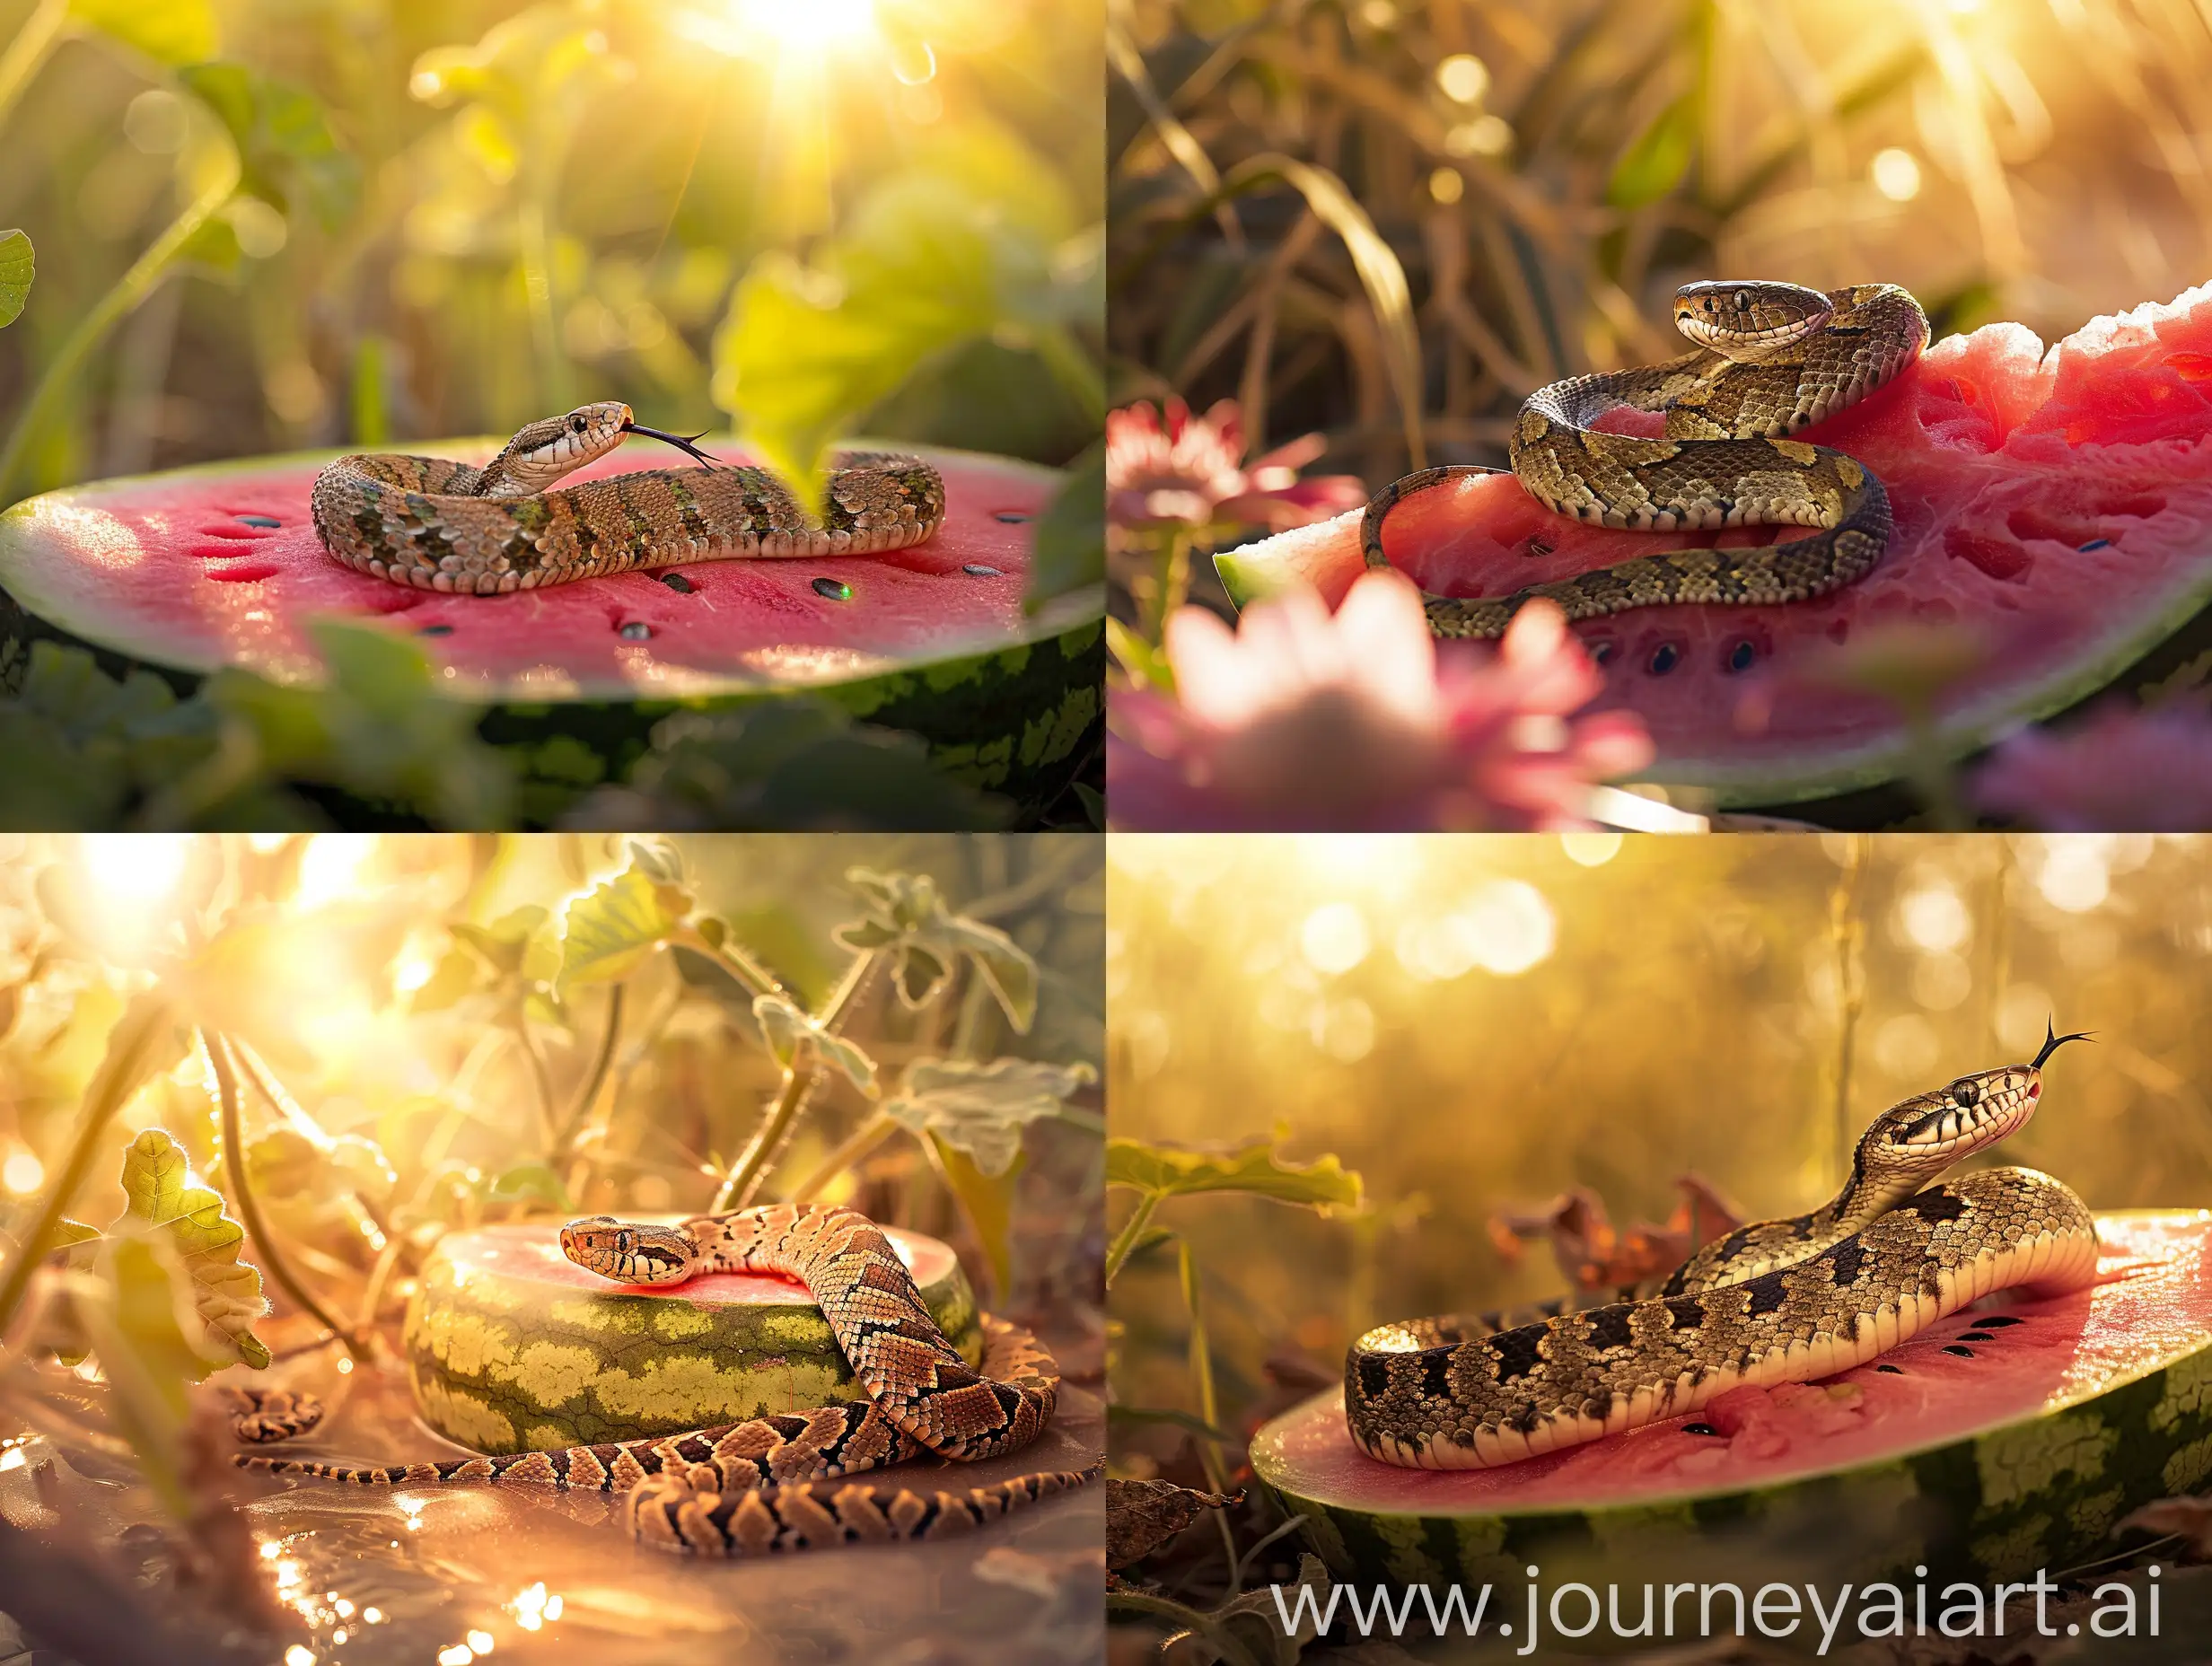 High detailed photo capturing a Watermelon, Georgia Rattlesnake. The sun, casting a warm, golden glow, bathes the scene in a serene ambiance, illuminating the intricate details of each element. The composition centers on a Watermelon, Georgia Rattlesnake. Melons get 2 long and weigh 30 lb. The flesh is bright pink and sweet. The rind is thin but very tough, which made it a favorite of market gardeners.. The image evokes a sense of tranquility and natural beauty, inviting viewers to immerse themselves in the splendor of the landscape. --ar 16:9 